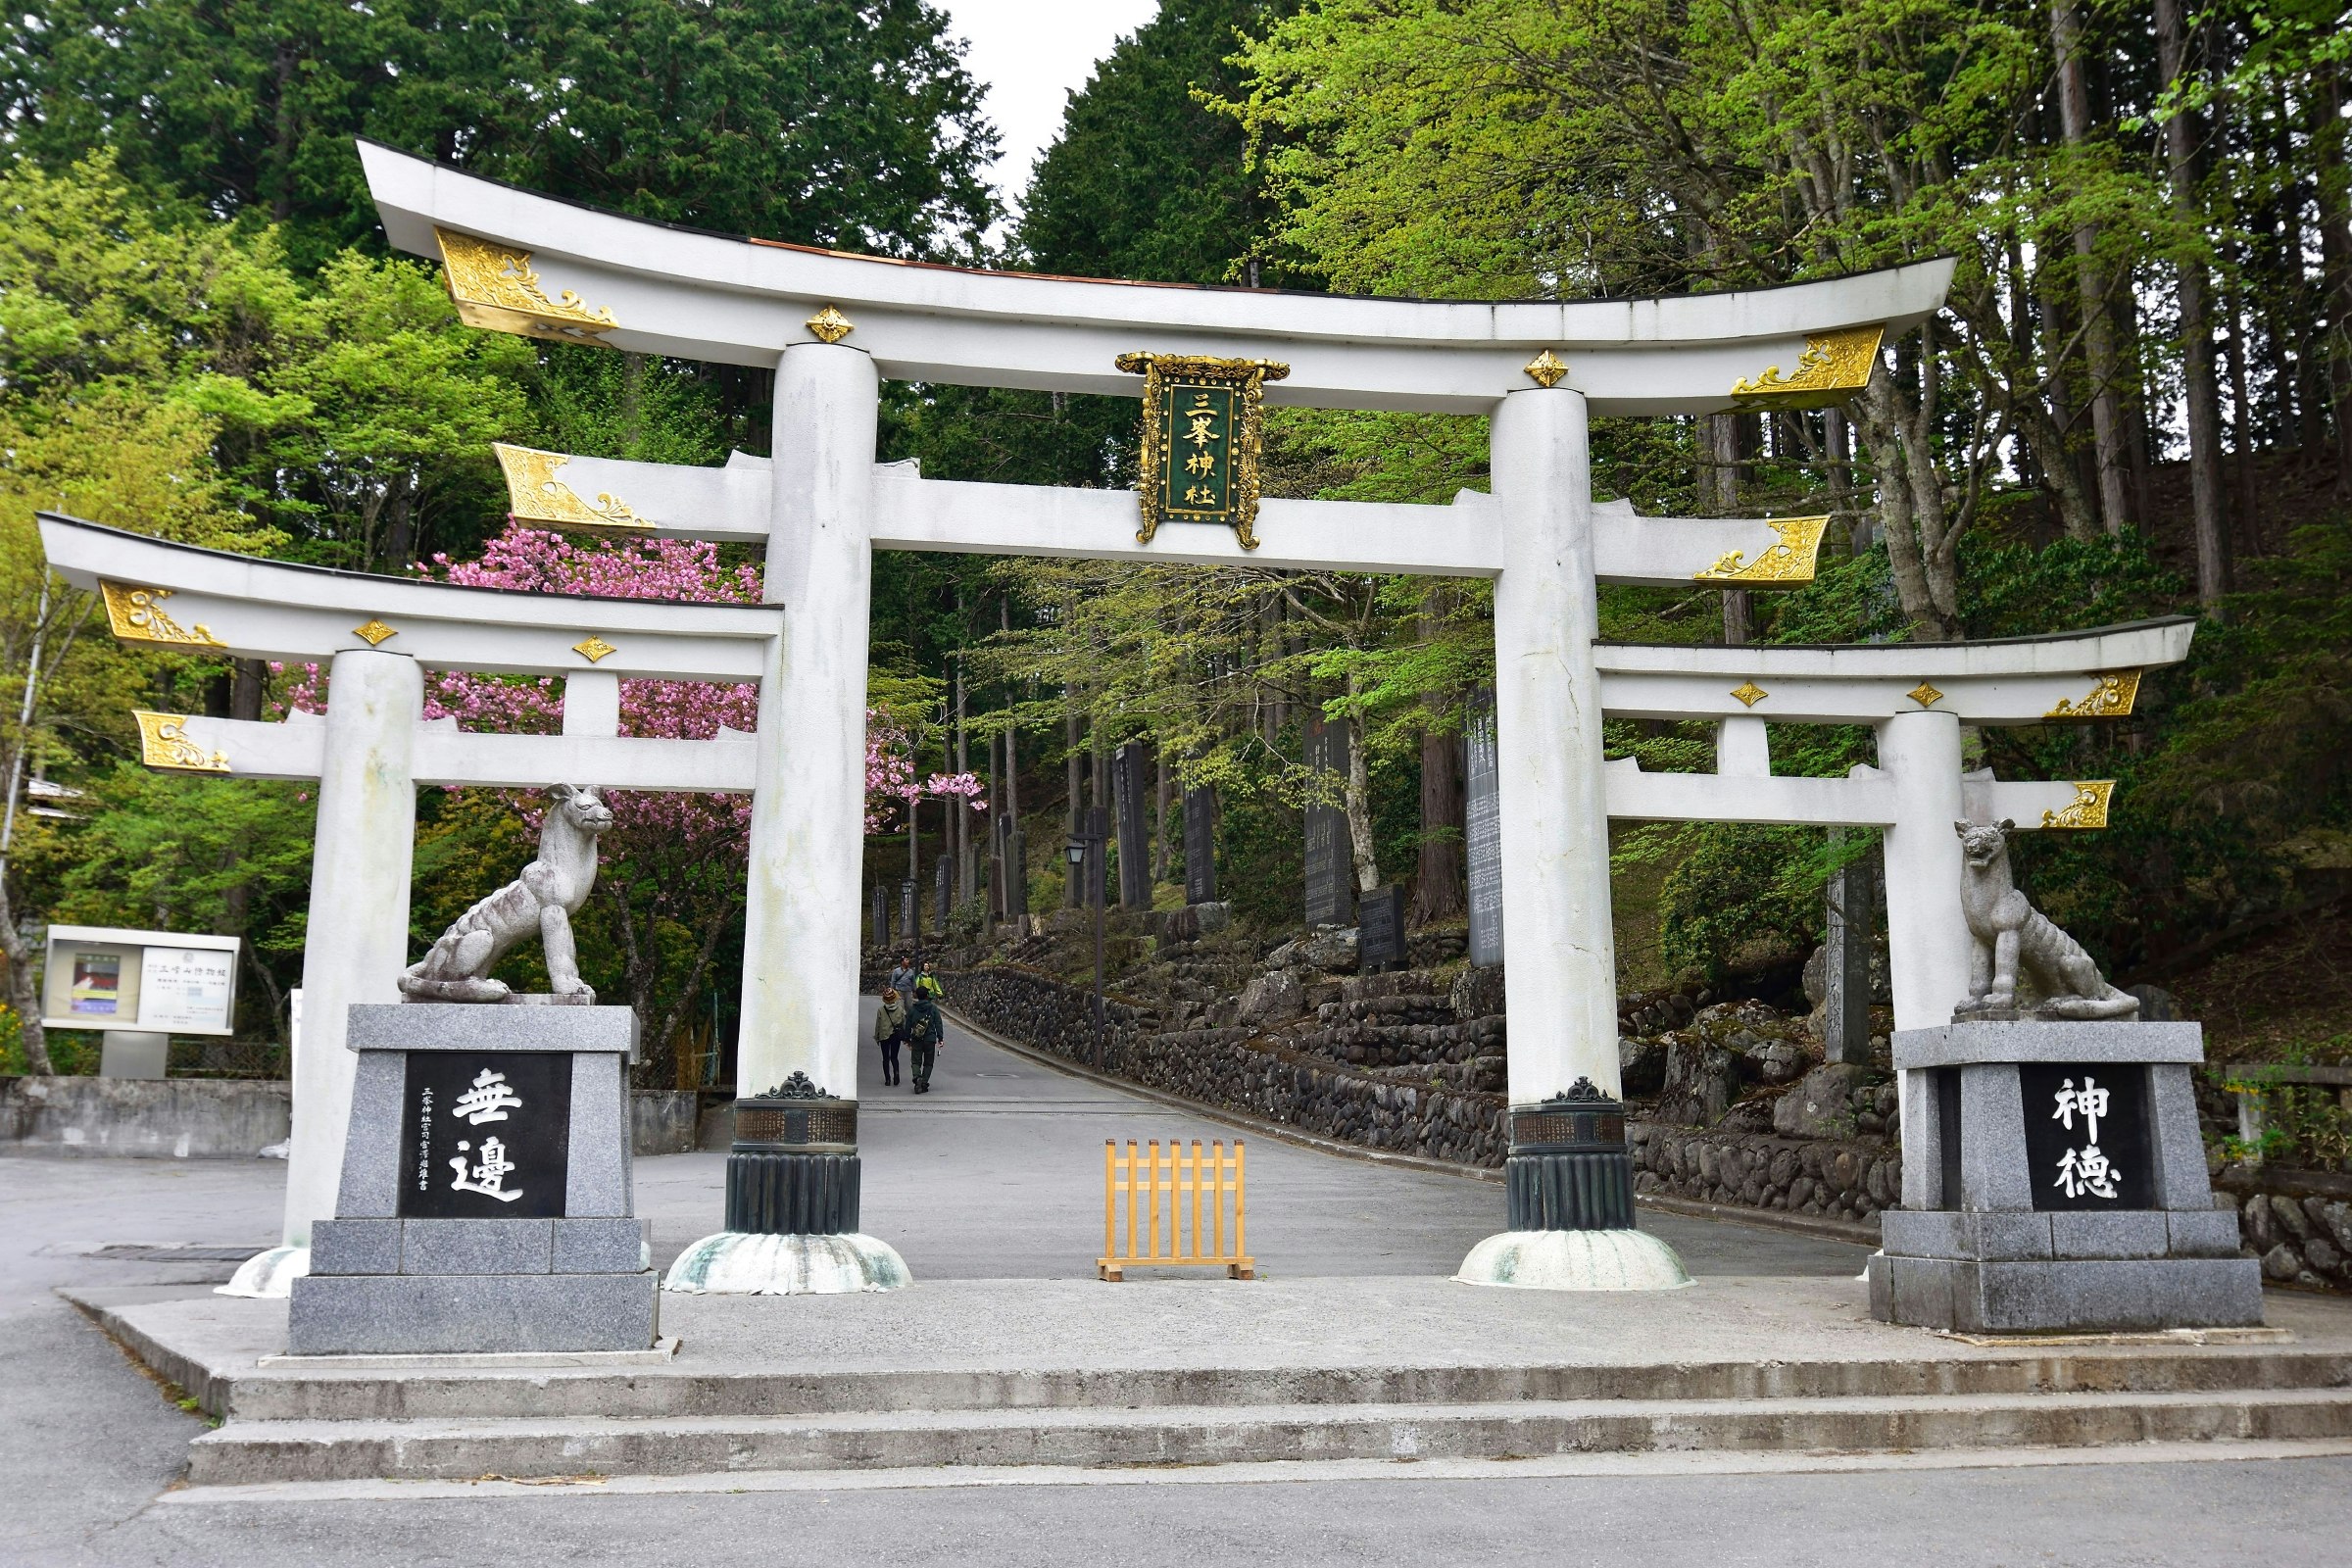 A white Torii gate at the entrance to the Mitsumine shrine